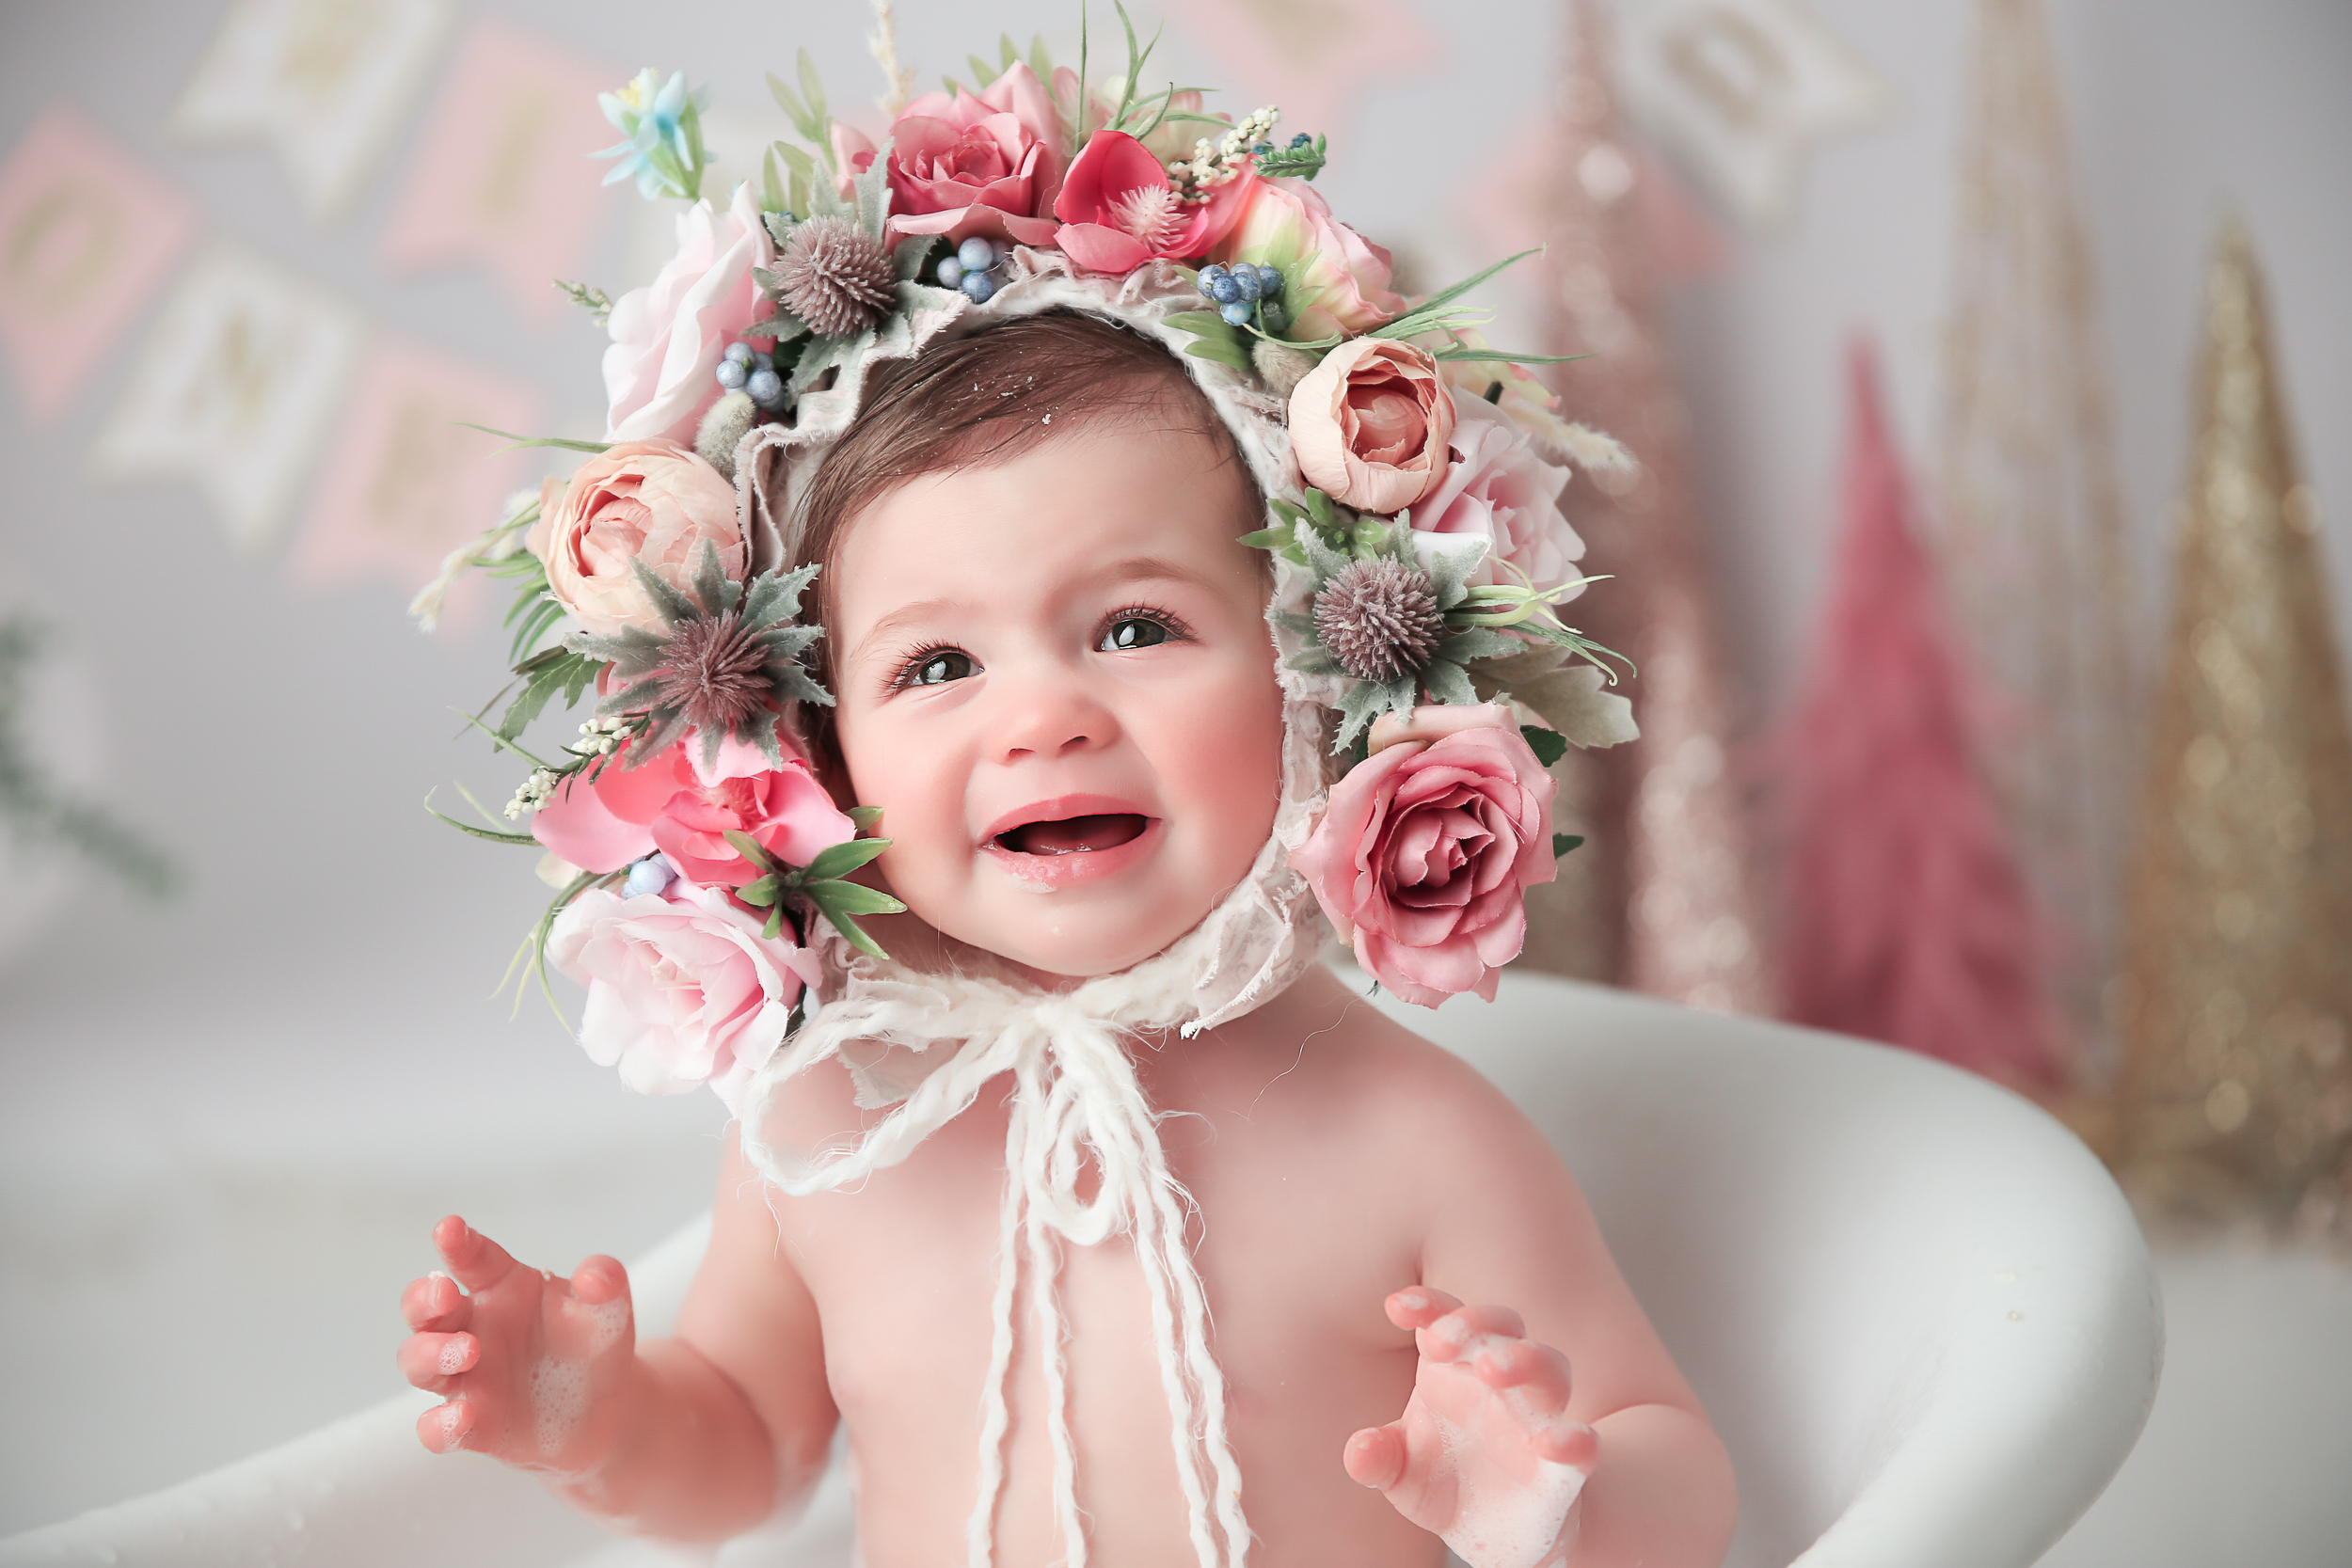 close up of a baby girl in a floral bonnet smiling while she's in a bathrub